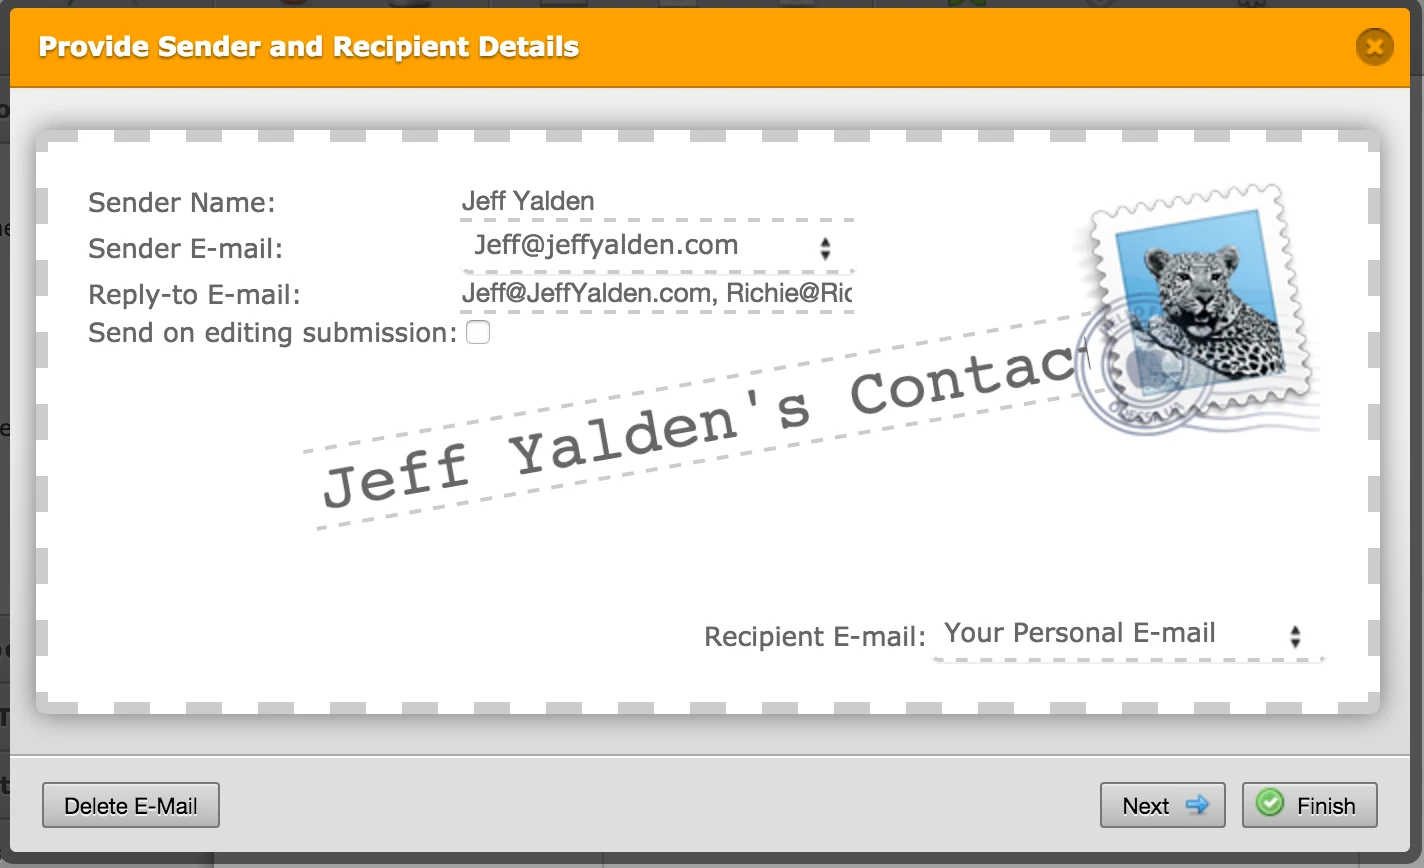 Send email to more than 1 recipient using autoresponders Image 1 Screenshot 20